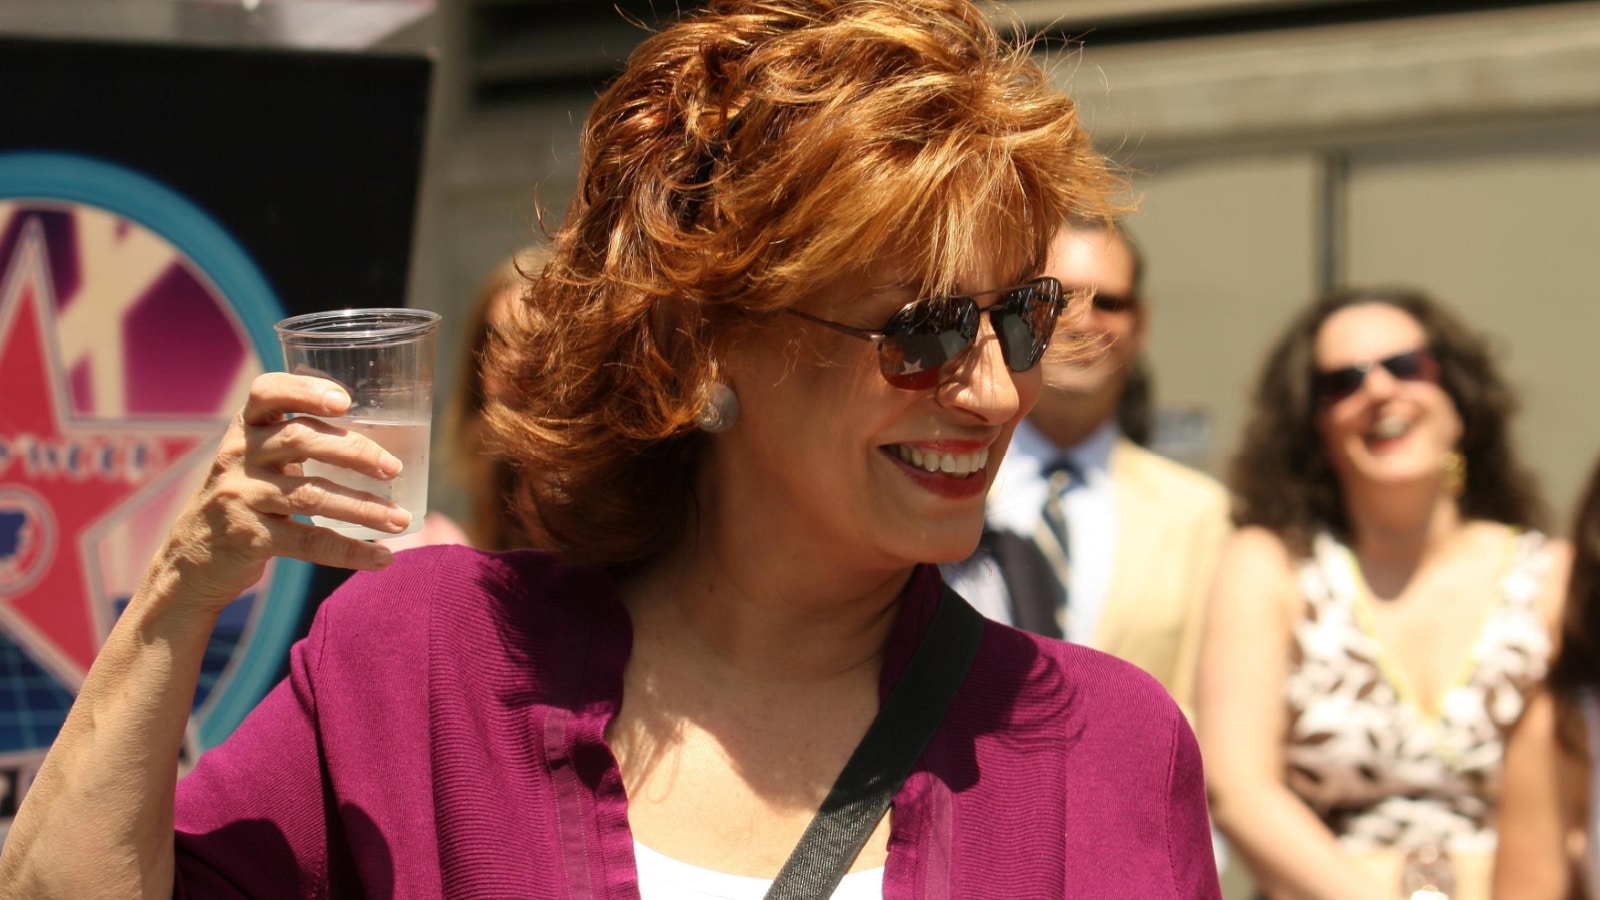 Joy Behar at the award ceremony honoring Barbara Walters with a star on the Hollywood Walk of Fame. Hollywood Blvd., Hollywood, CA. 06-14-07